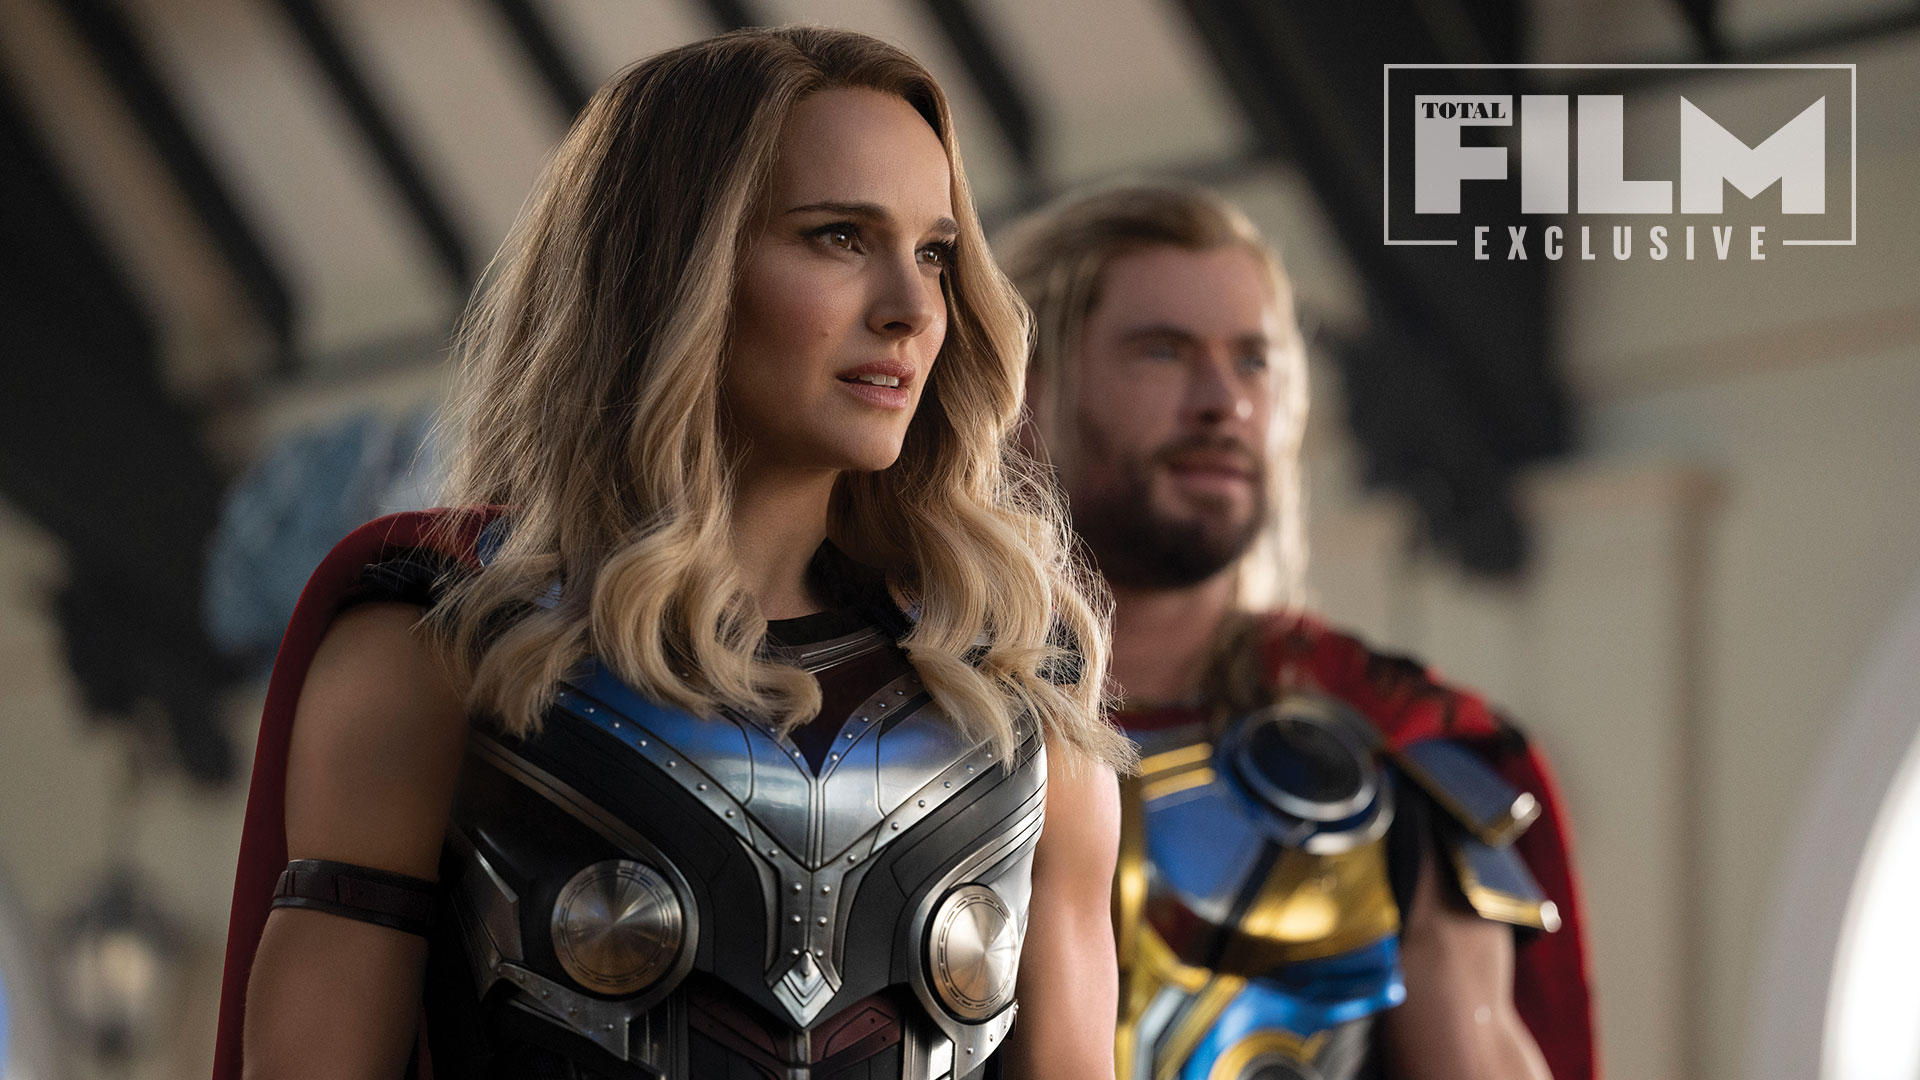 Taika Waititi teases Thor: Love and Thunder: “Fans assume it’s the passing on of the torch… I don’t think that’s the case”